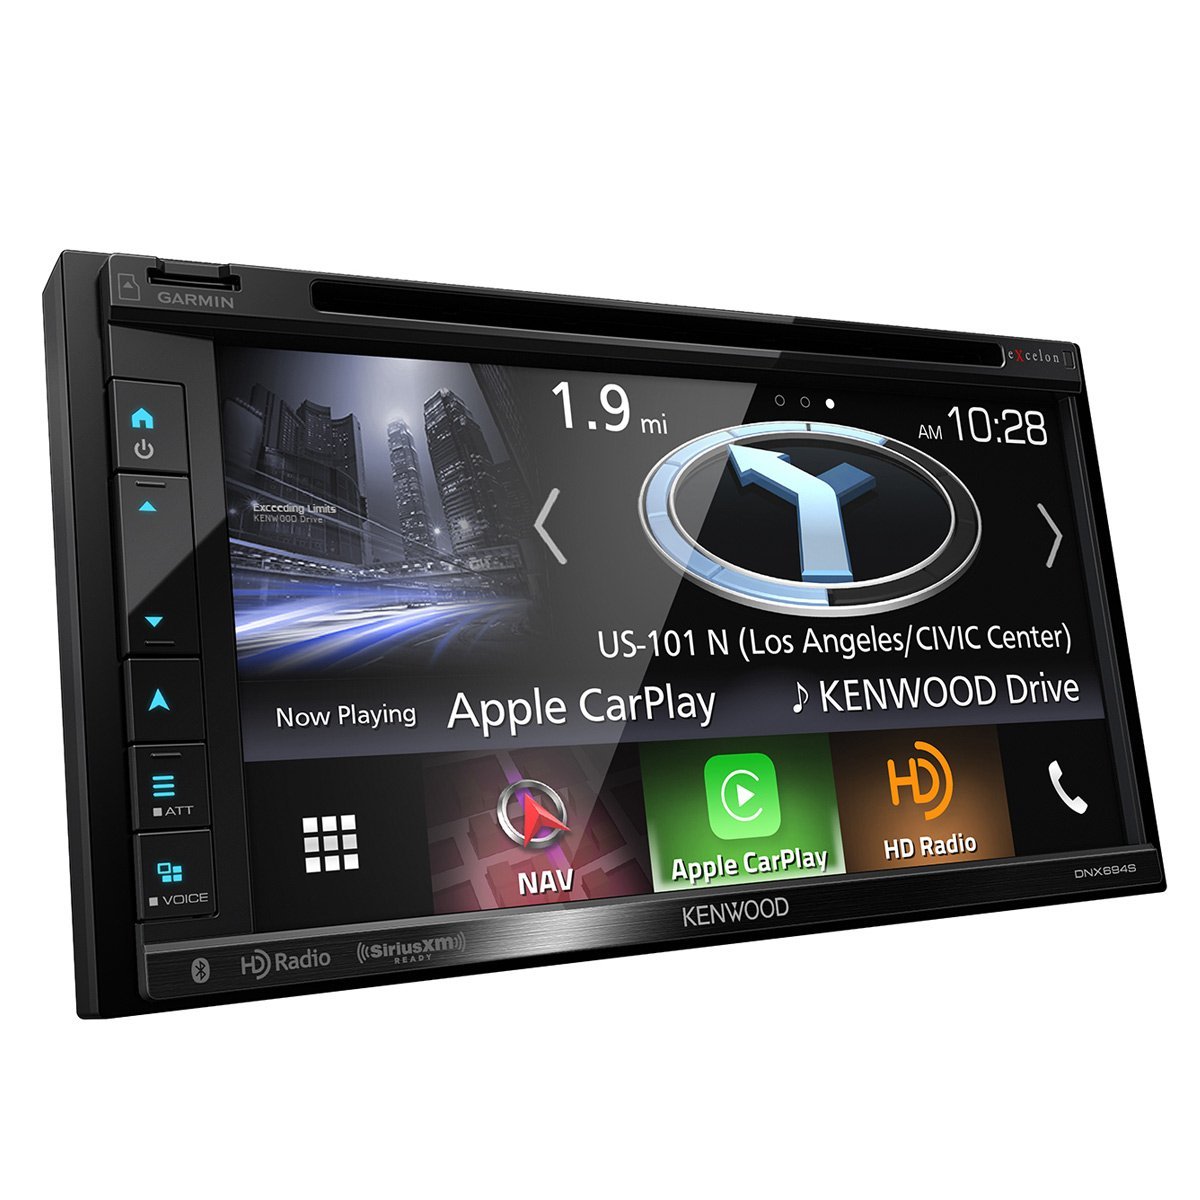 KENWOOD Excelon DNX694S In-Dash Navigation with 6.8